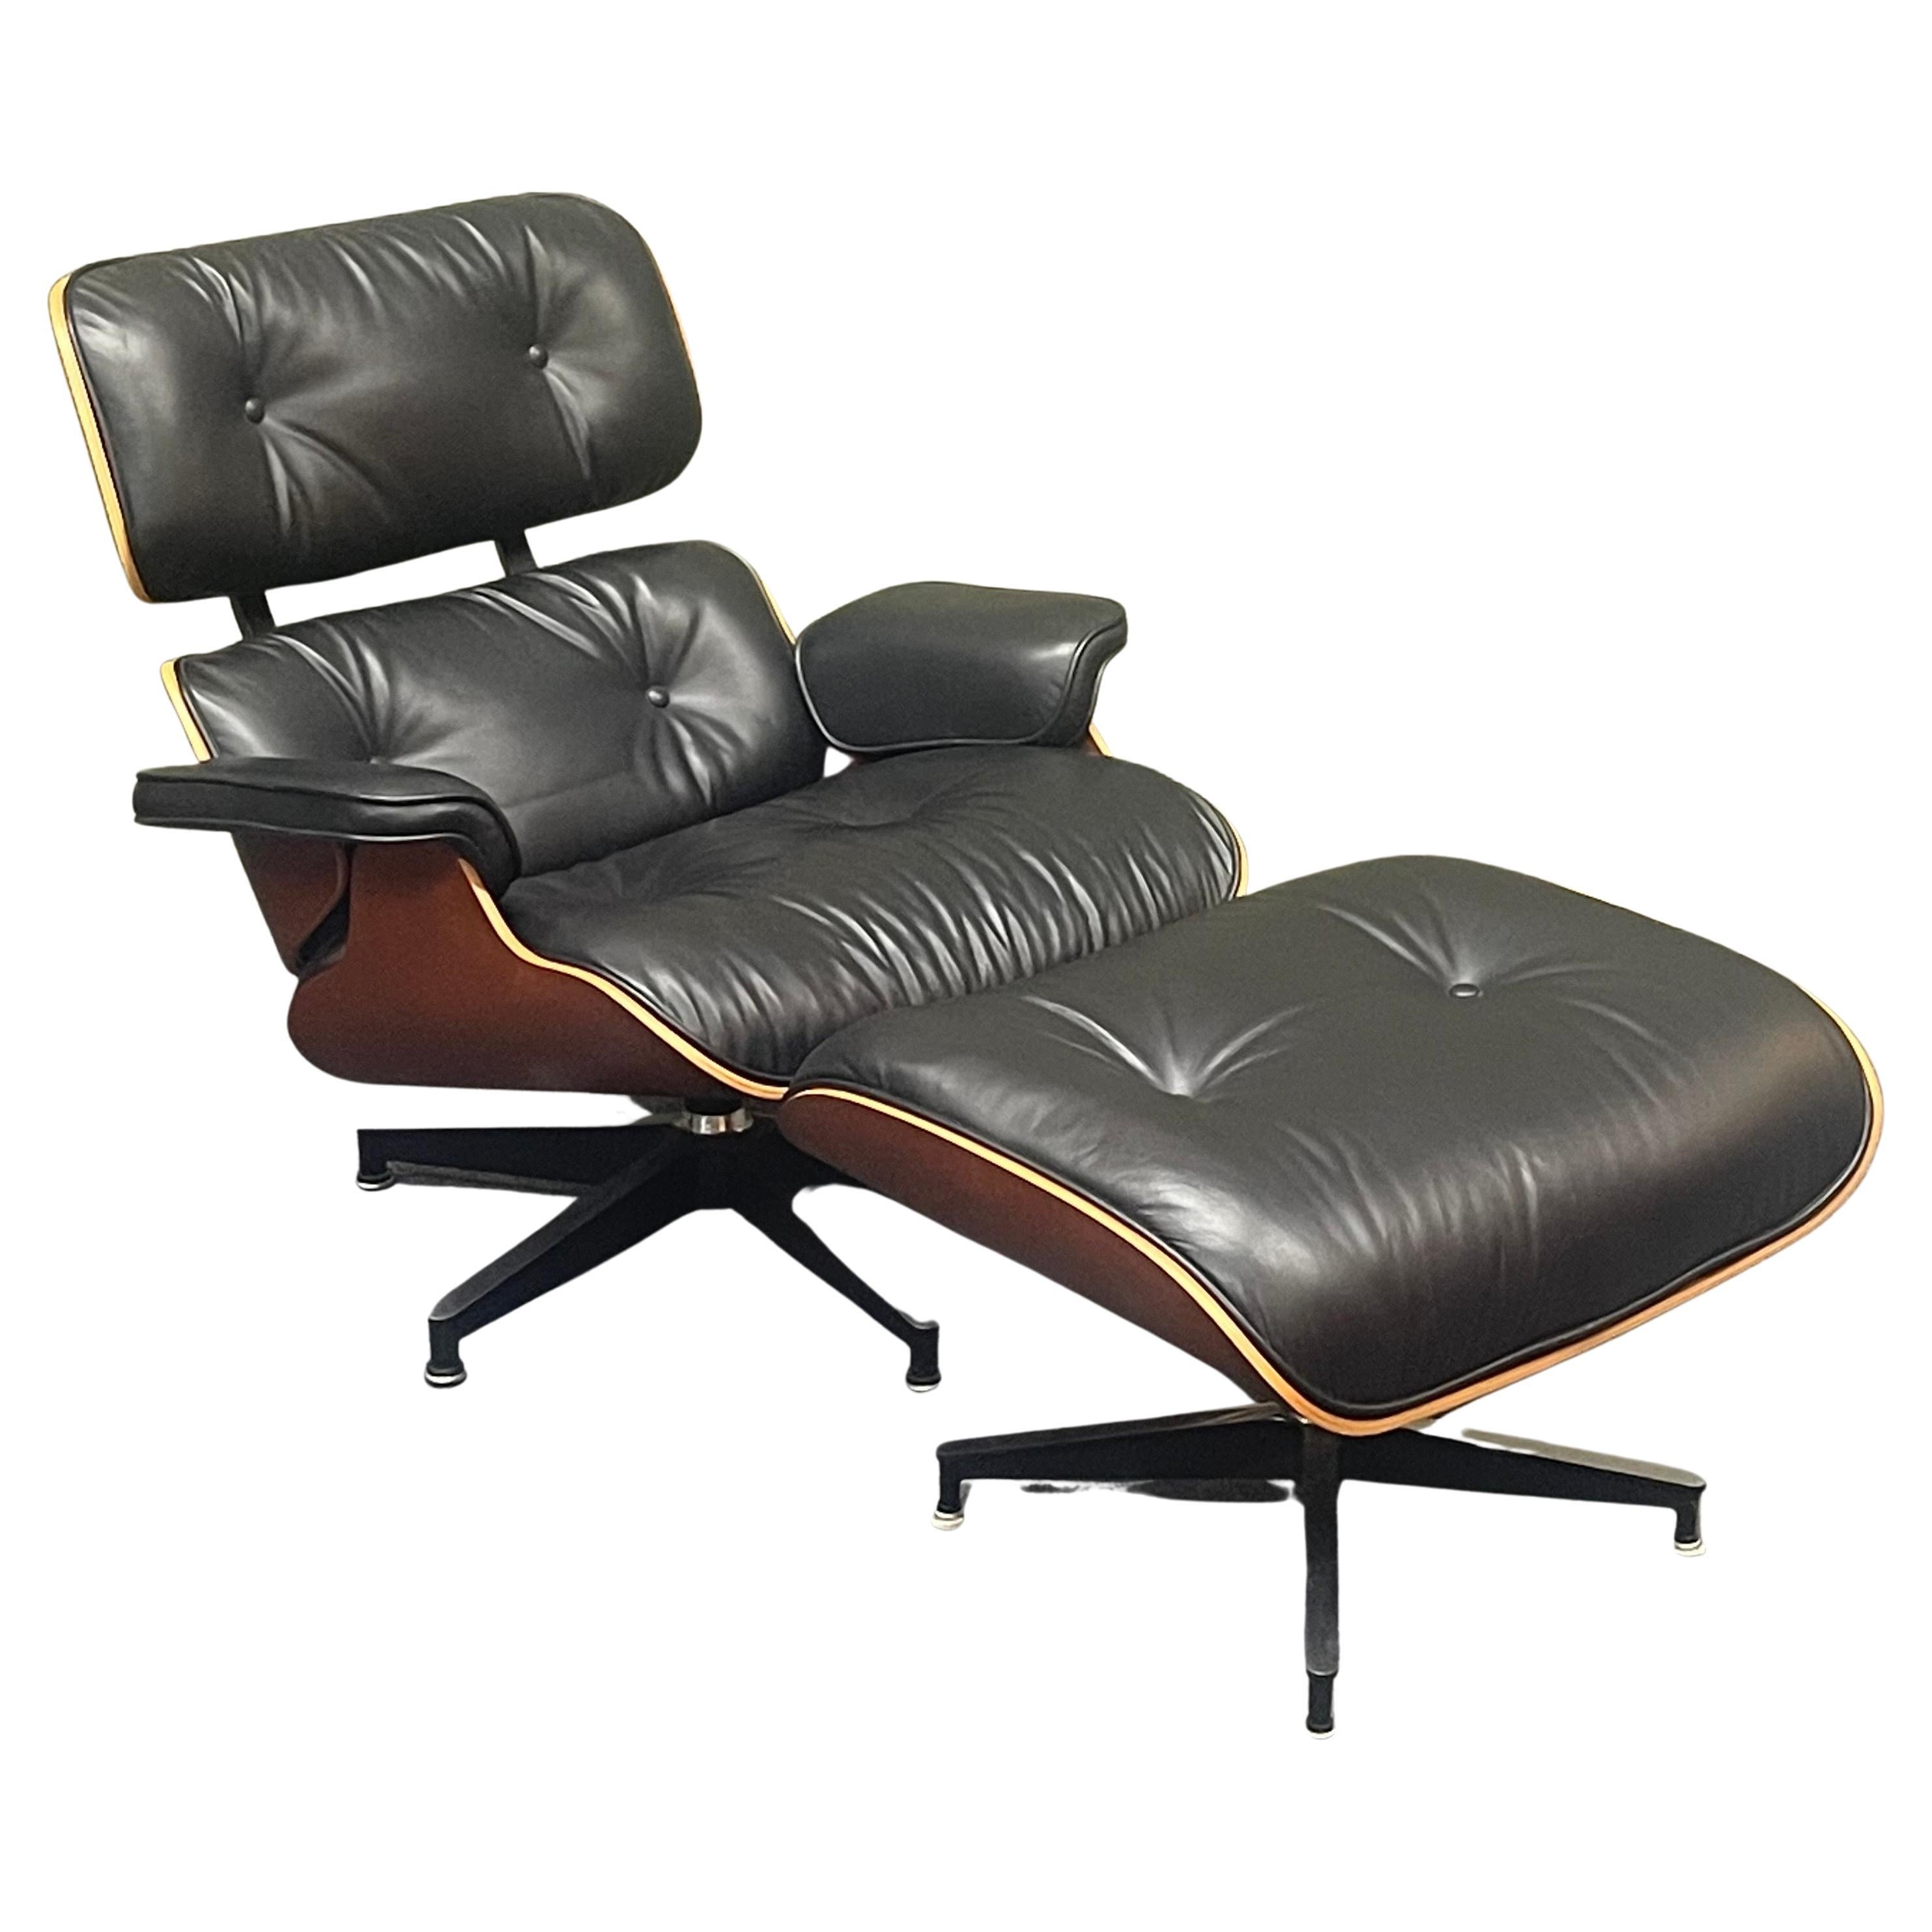 Iconic Herman Miller Eames Lounge Chair and Ottoman, Model 670 & 671